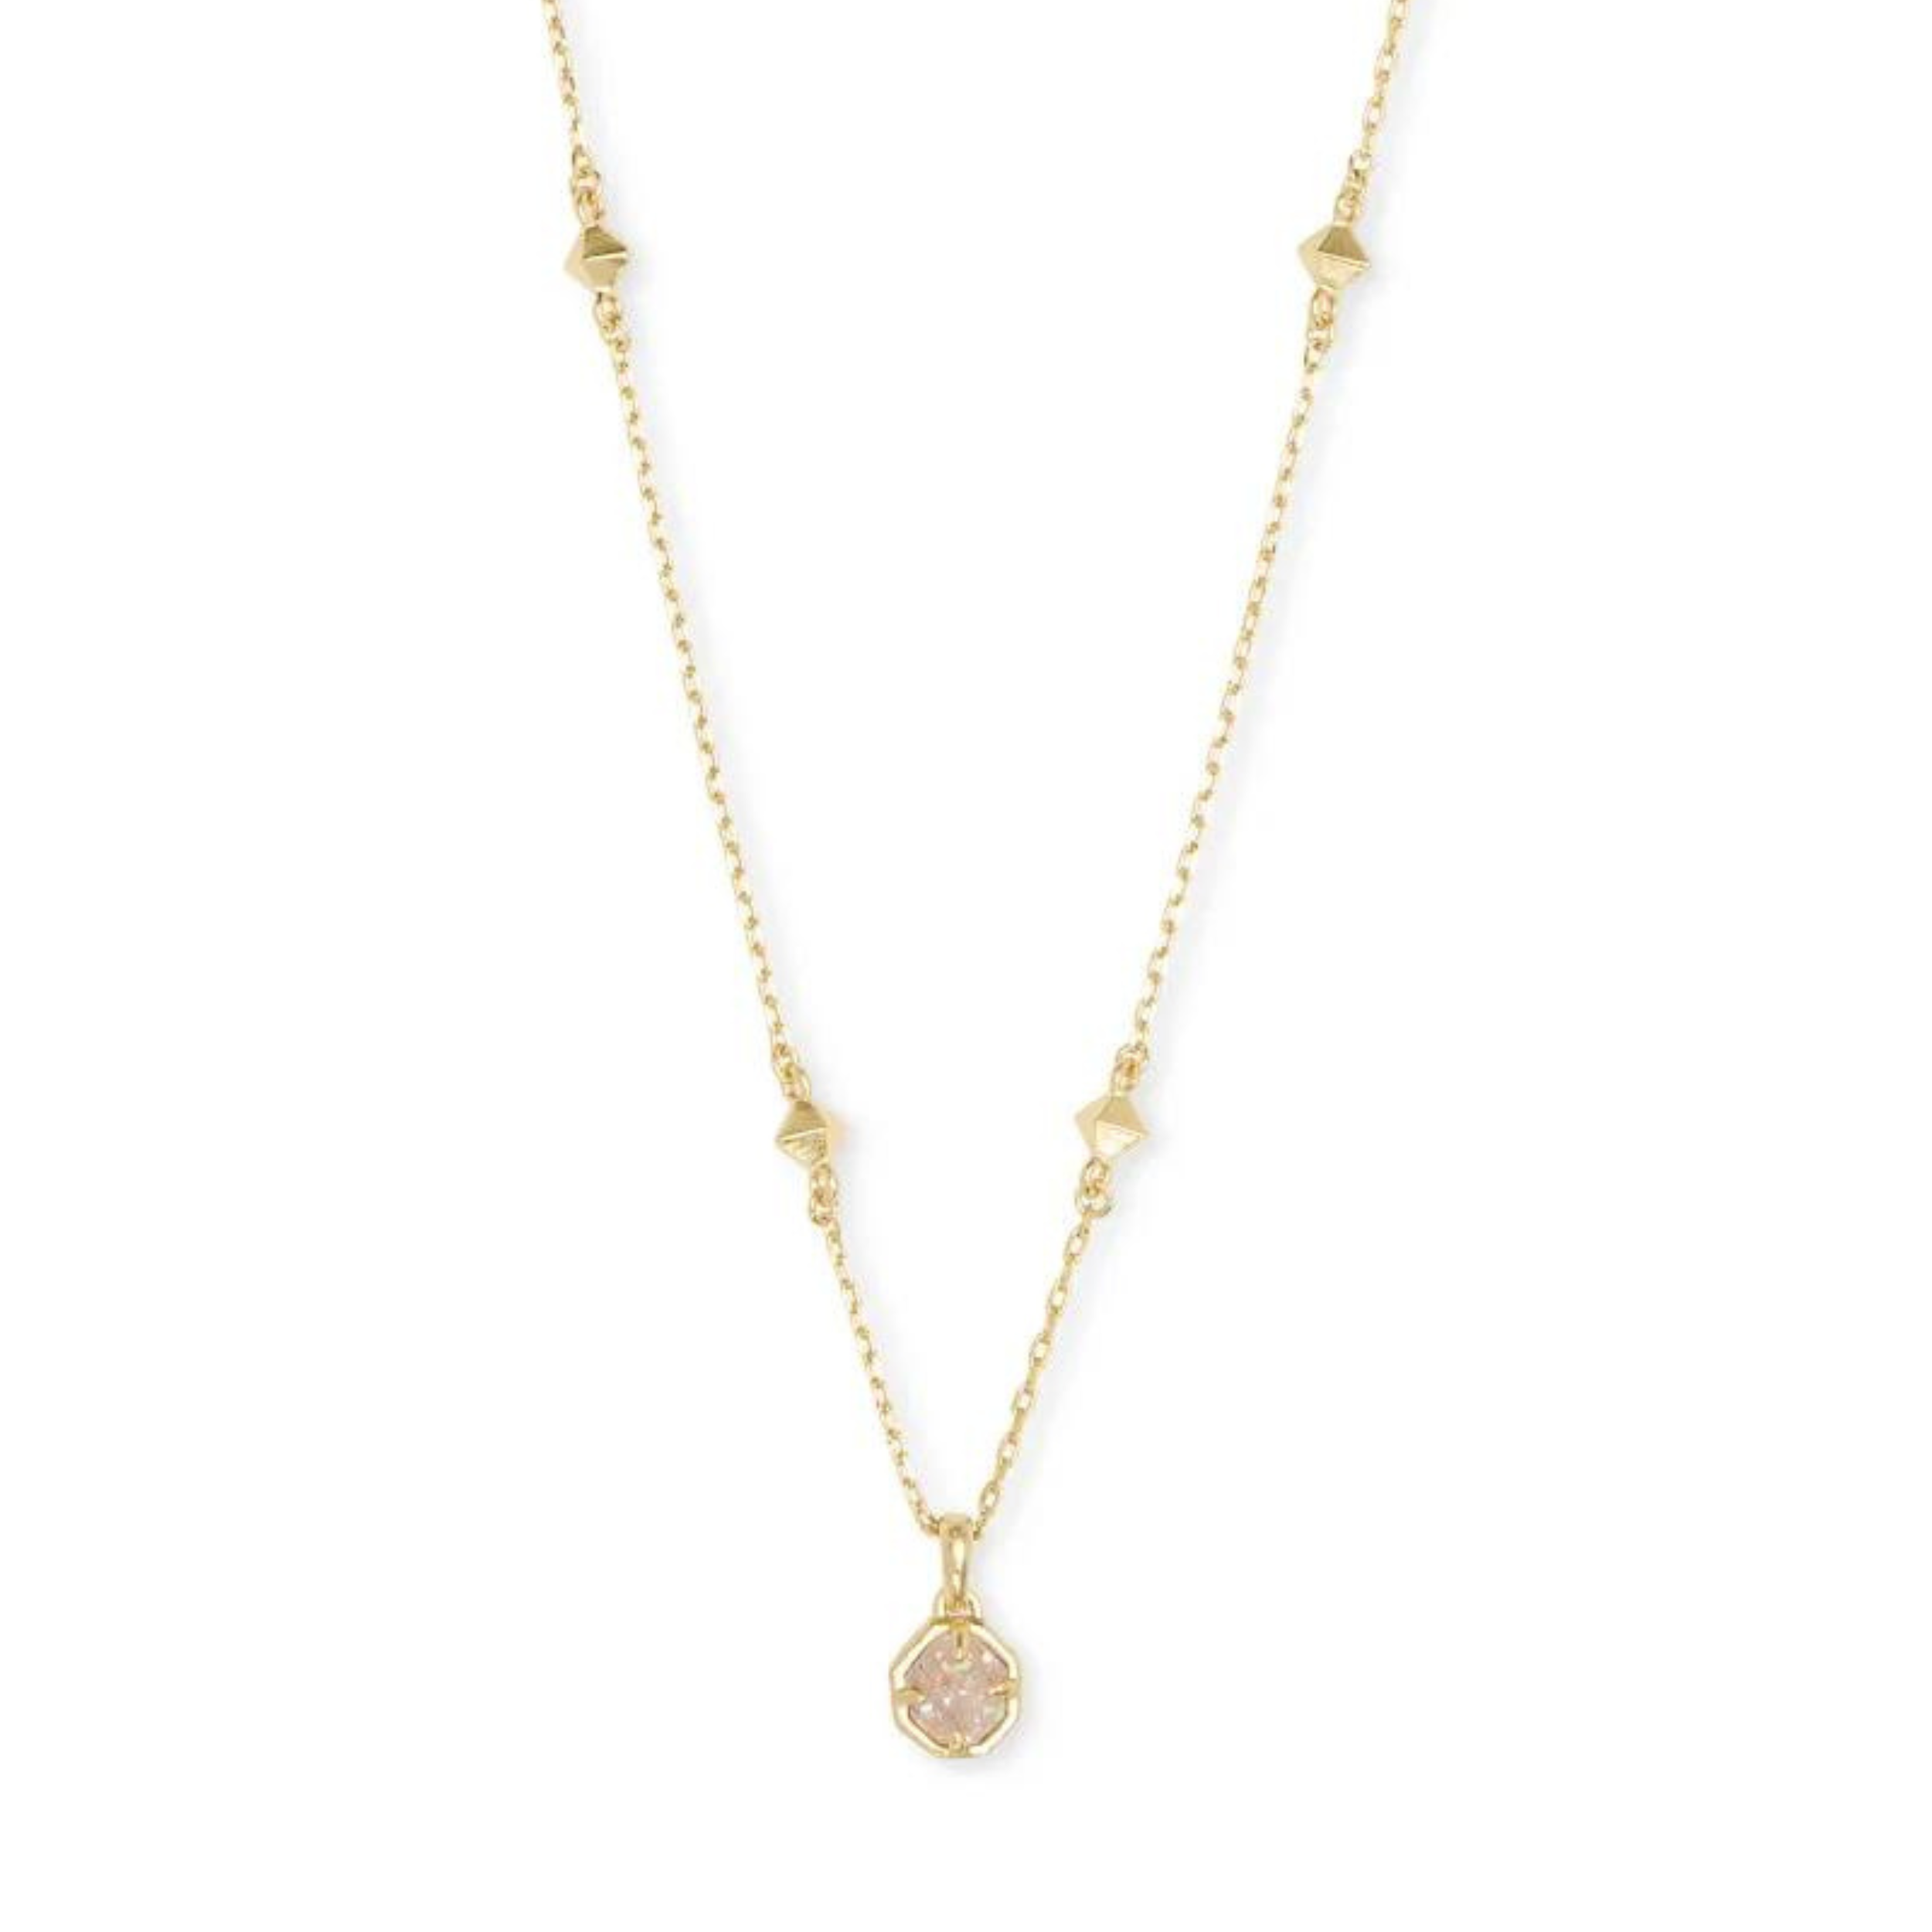 Gold necklace with iridescent drusy stone, pictured on a white background.